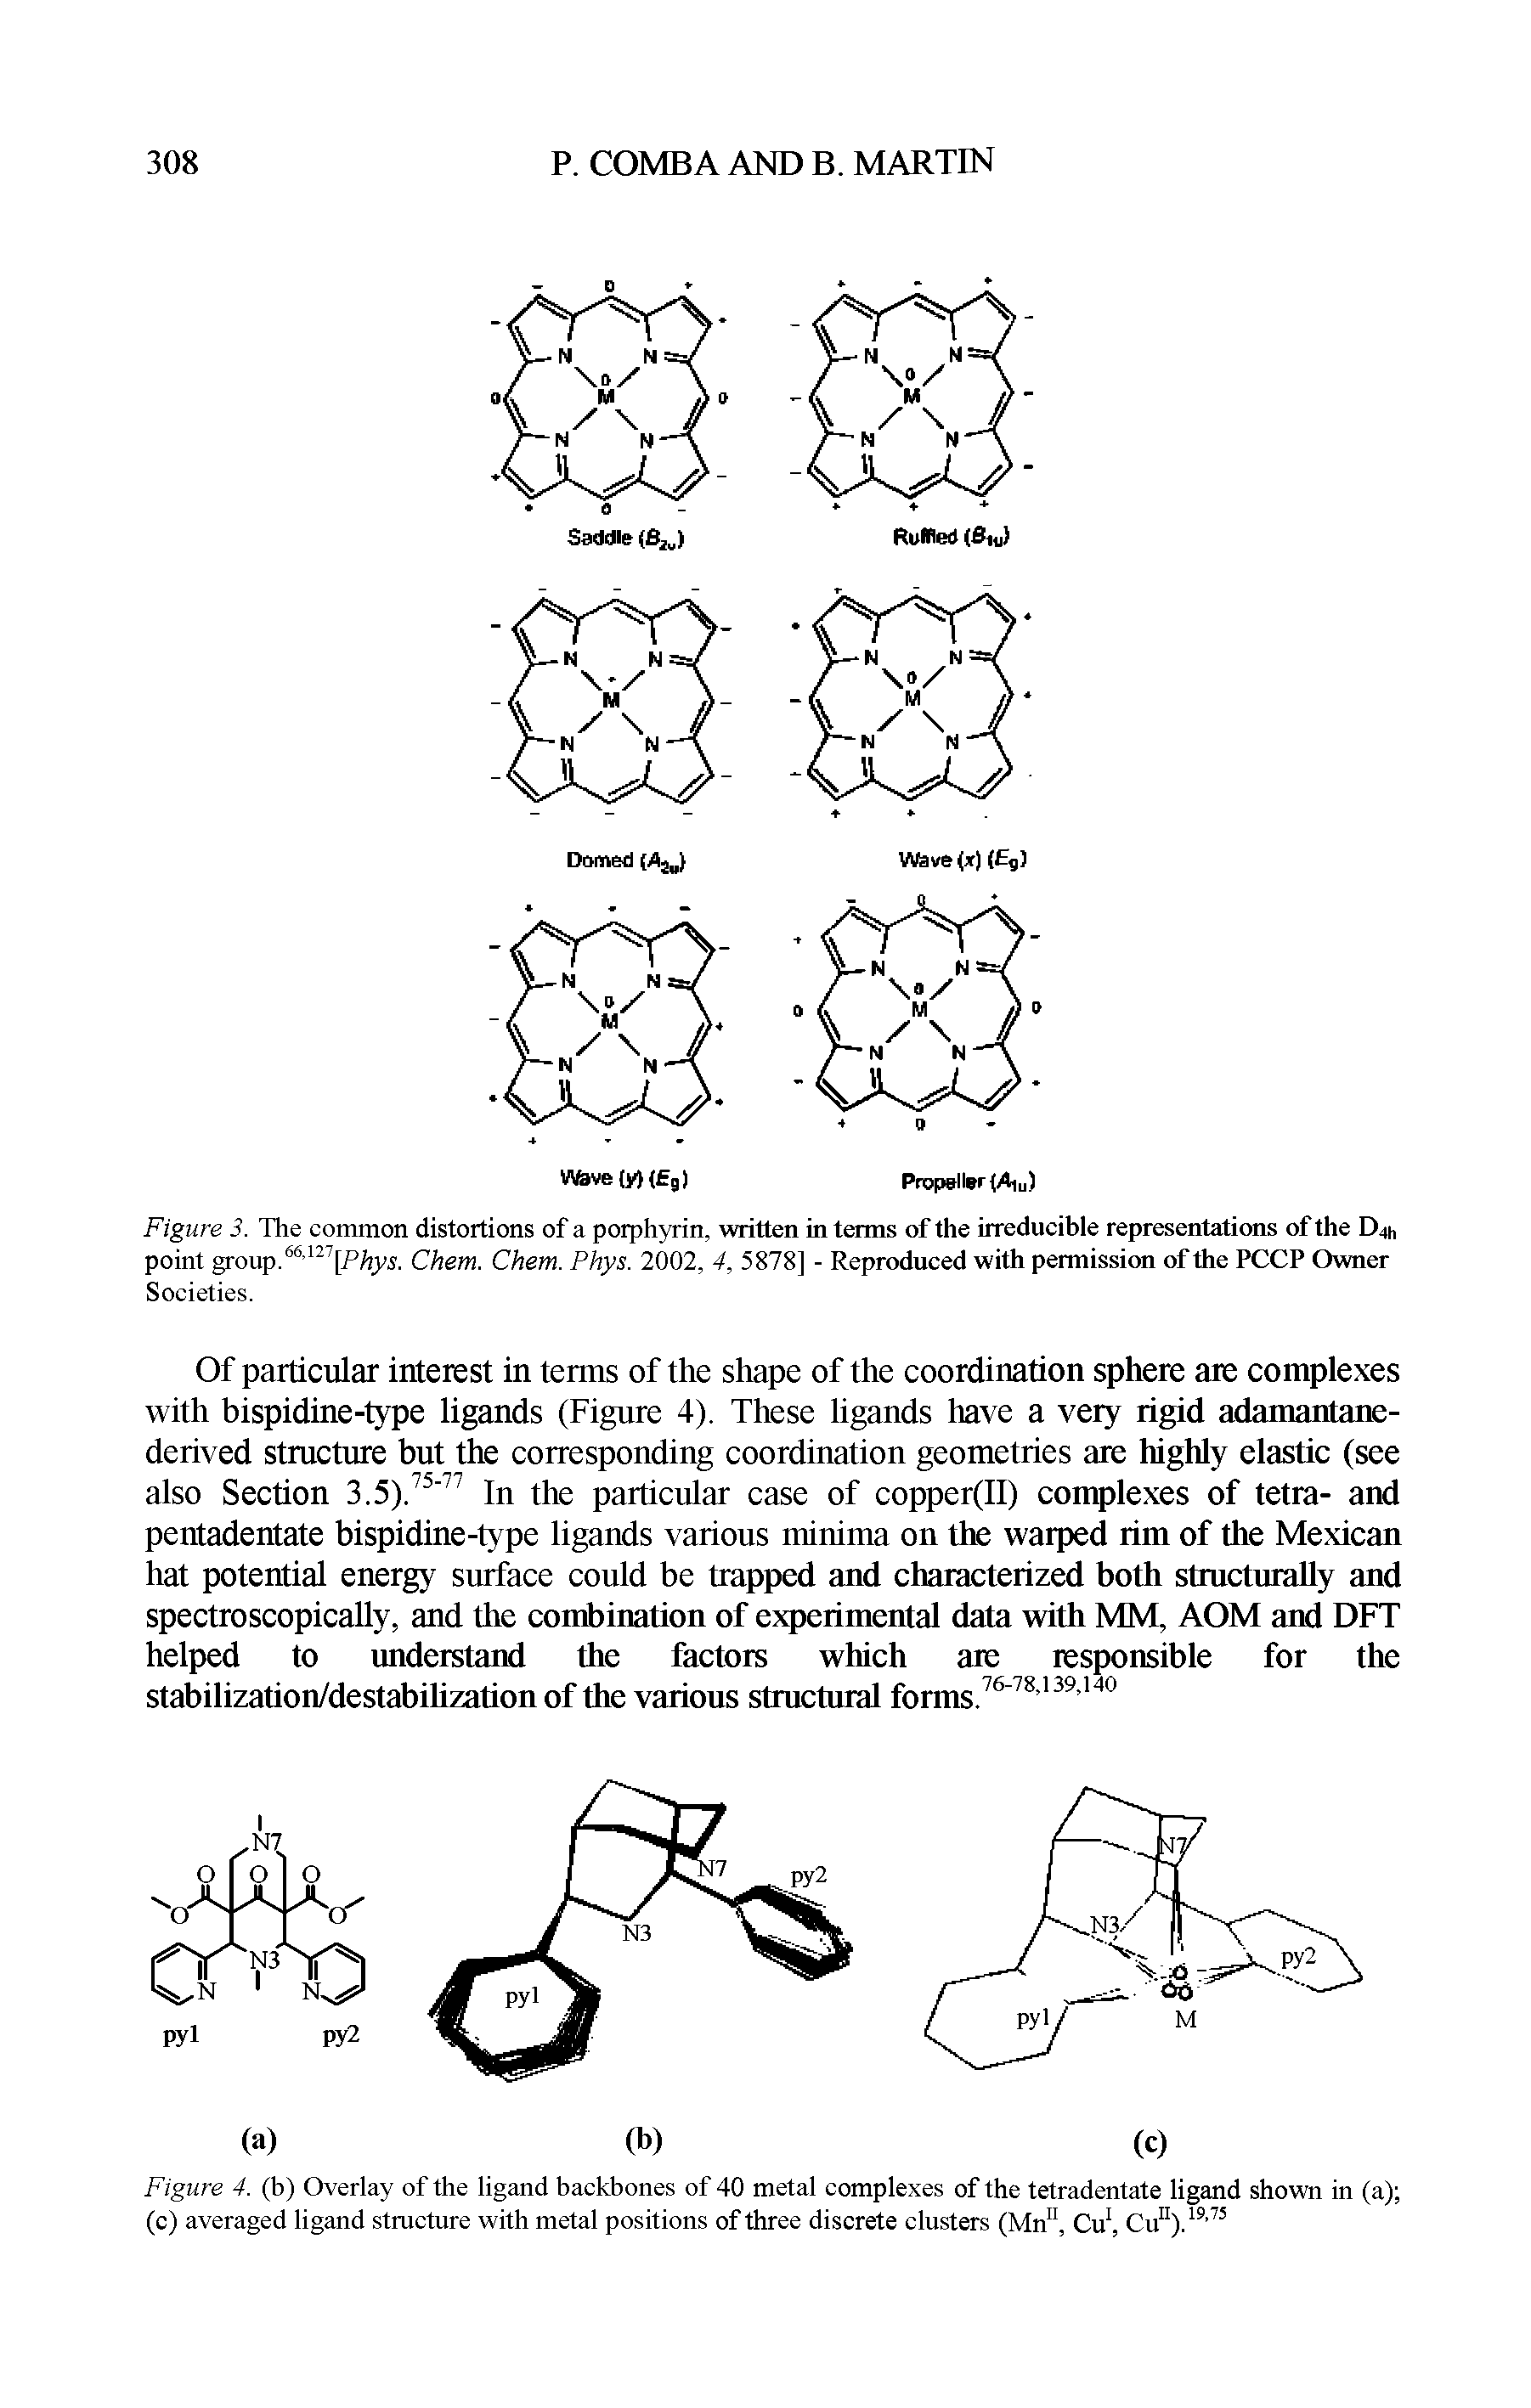 Figure 3. The common distortions of a porphyrin, written in terms of the irreducible representations of the D4h point group. 66-127[Phys. Chem. Chem. Phys. 2002, 4, 5878] - Reproduced with permission of the PCCP Owner Societies.